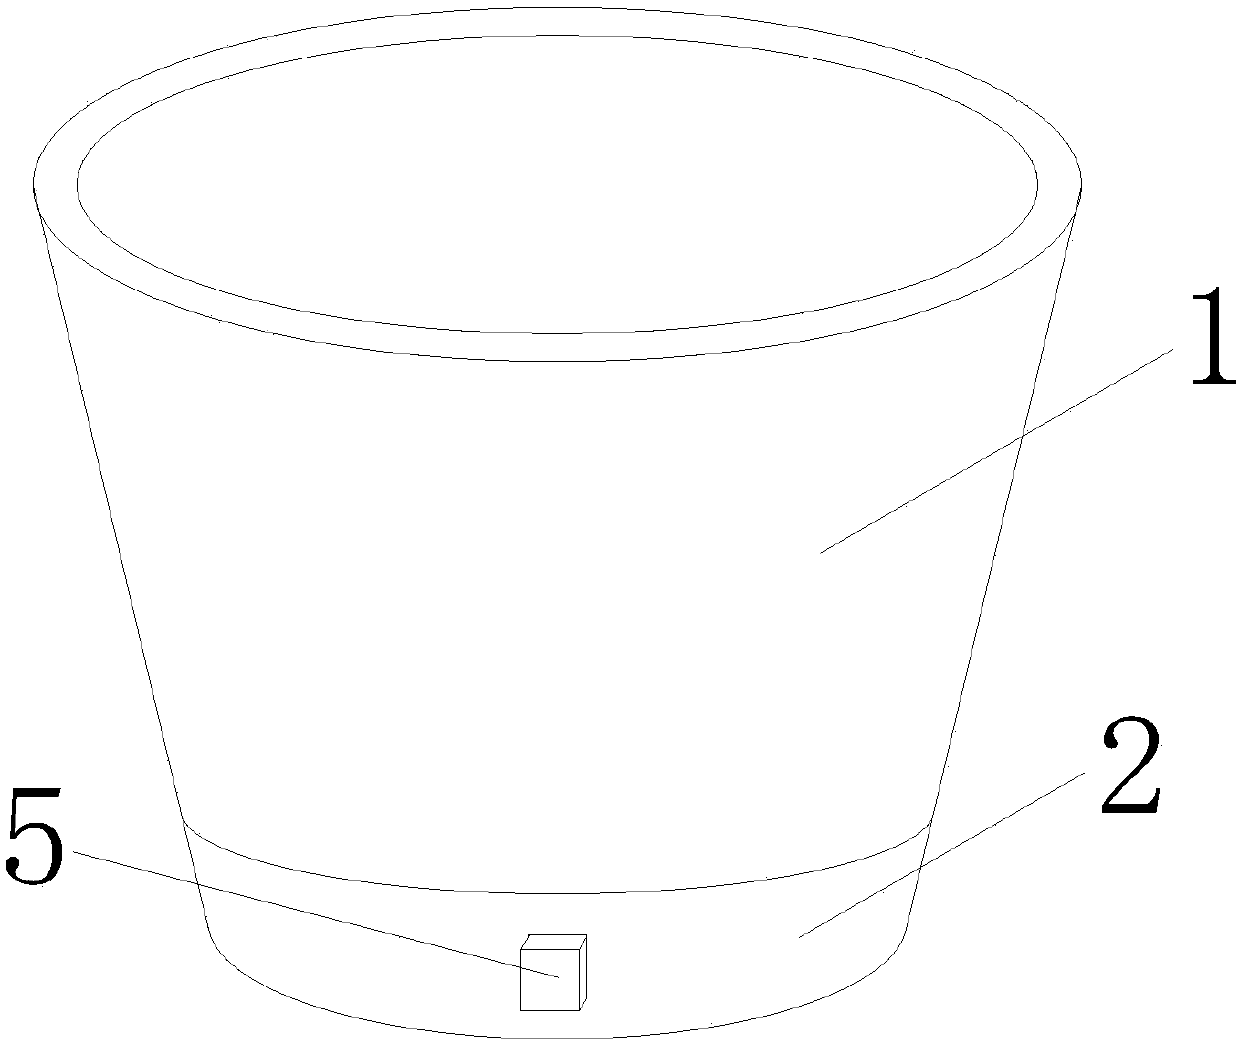 Music paper cup capable of producing sound